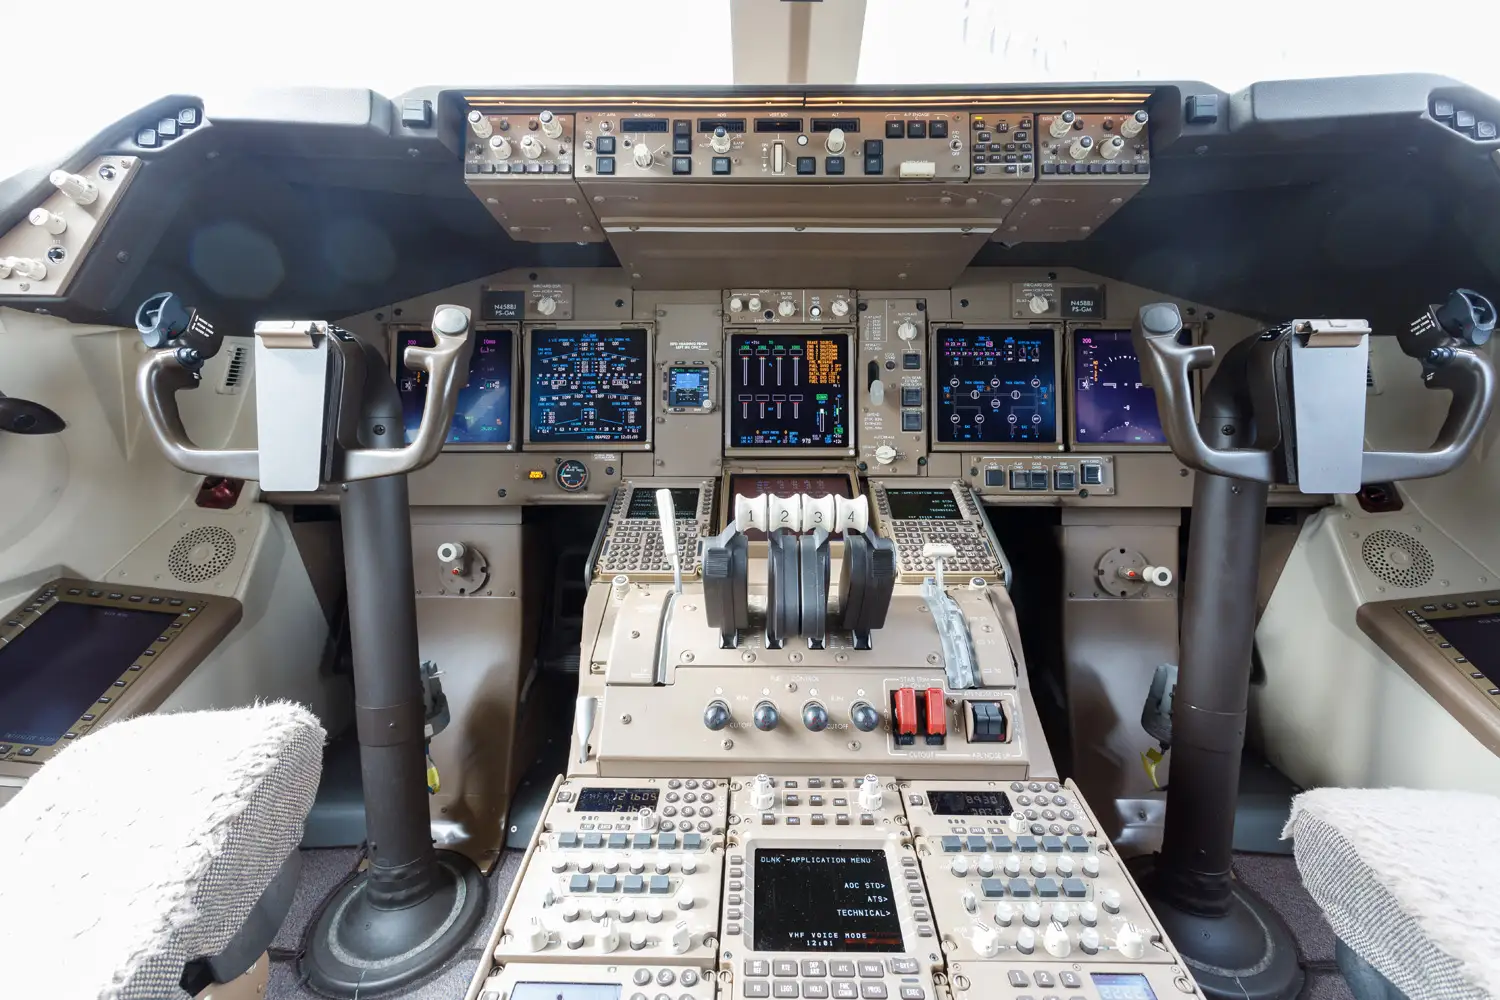 Cockpit of the Boeing 777 aircraft